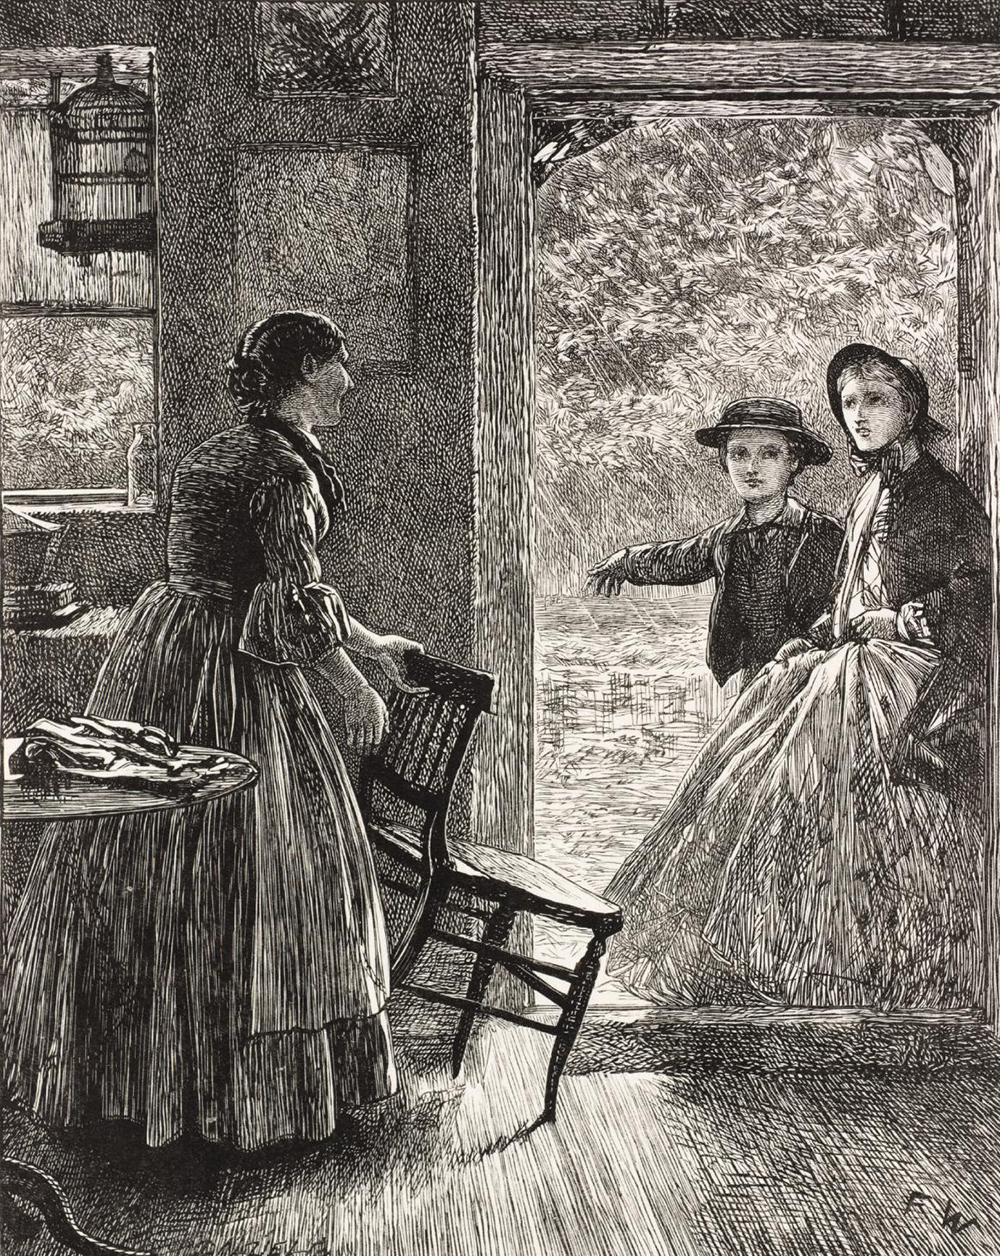 Wood engraving of a woman tilting a chair toward two people standing in an open doorway